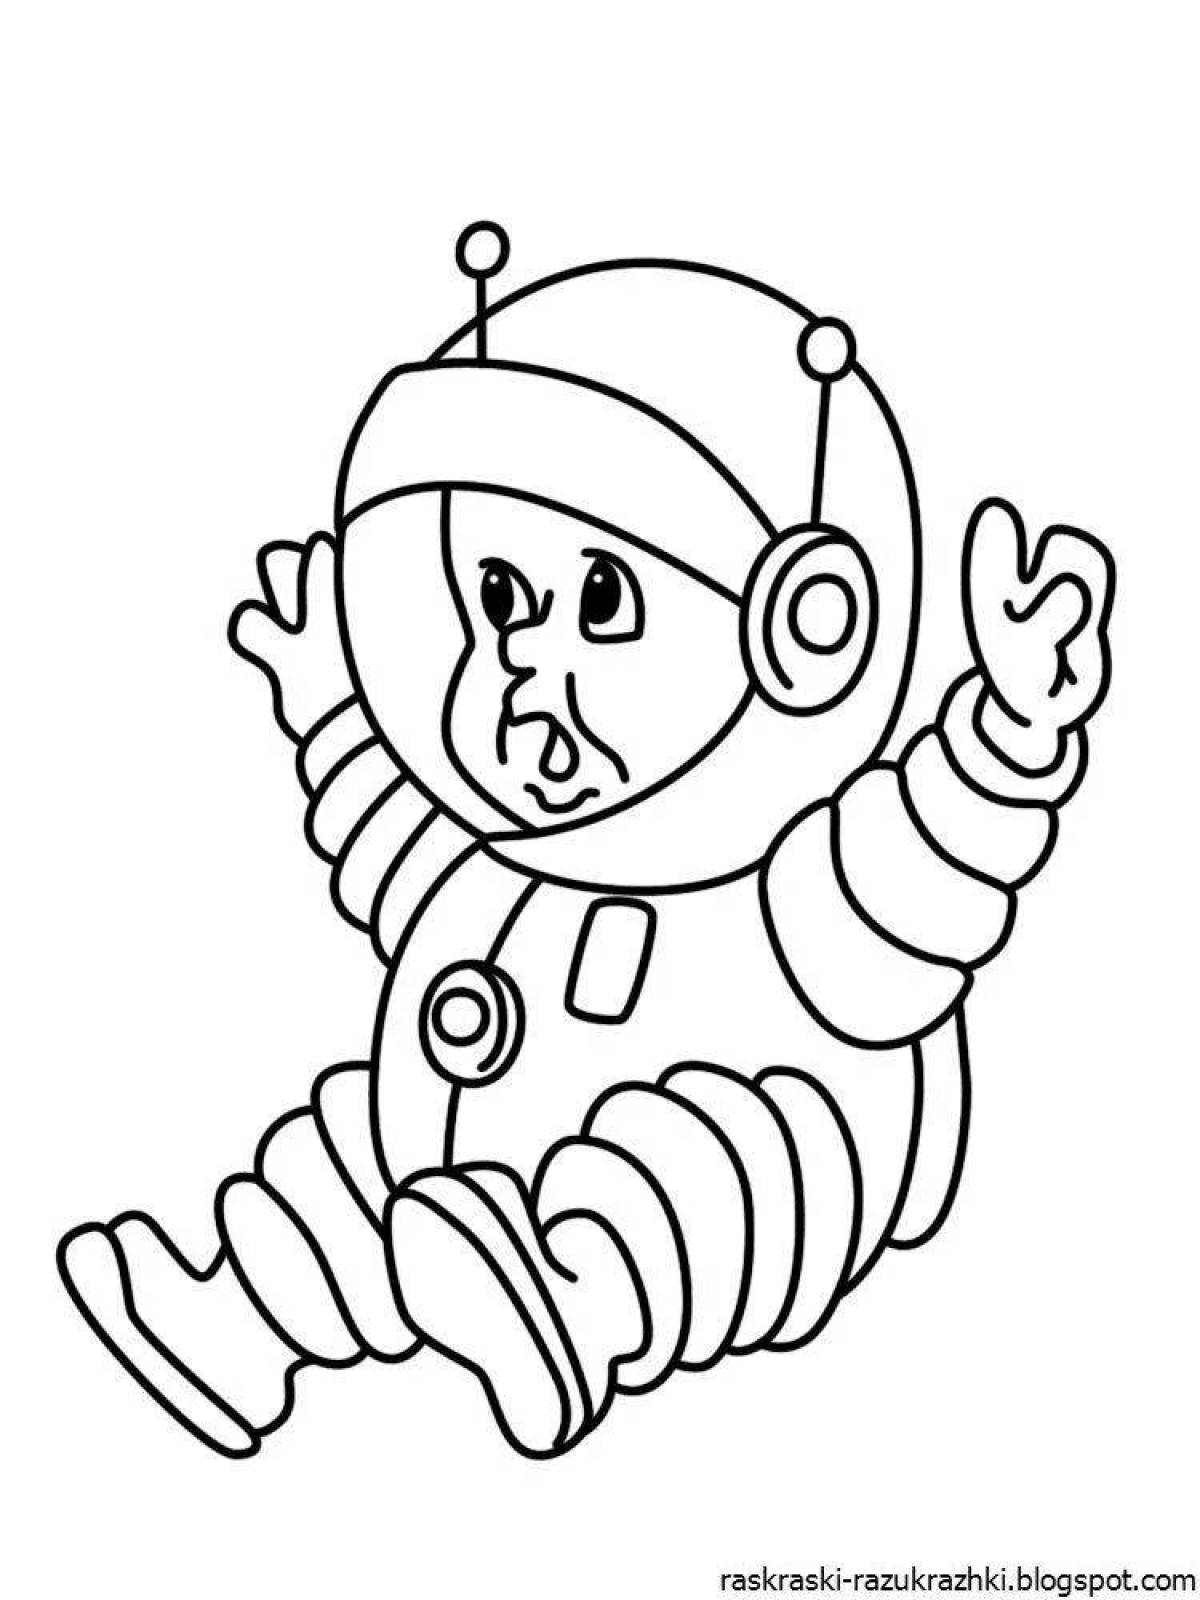 Amazing astronaut coloring book for kids